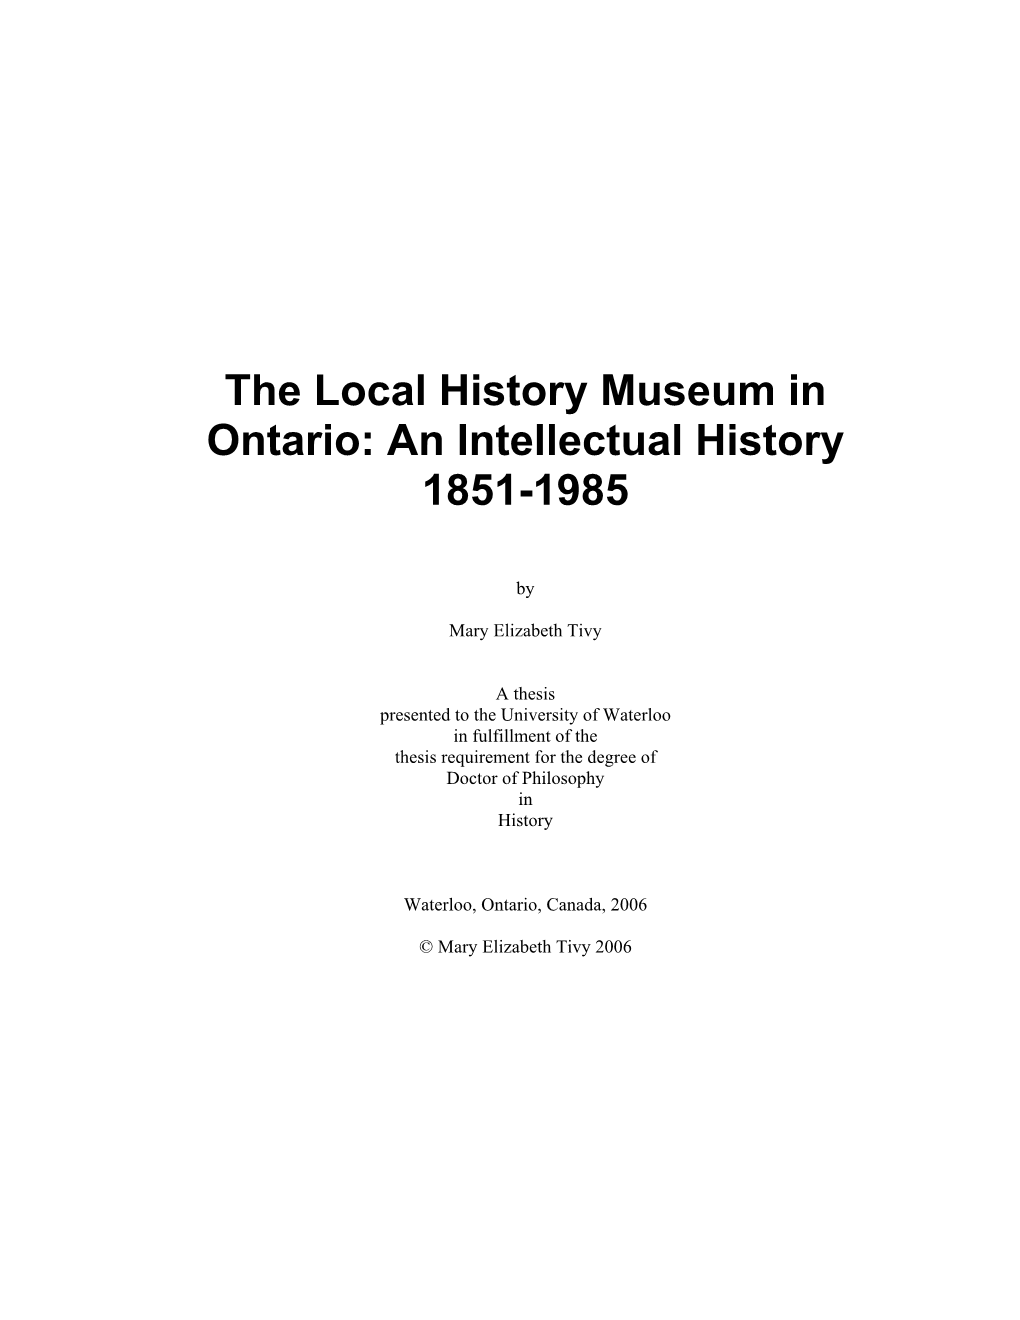 The Local History Museum in Ontario: an Intellectual History 1851-1985